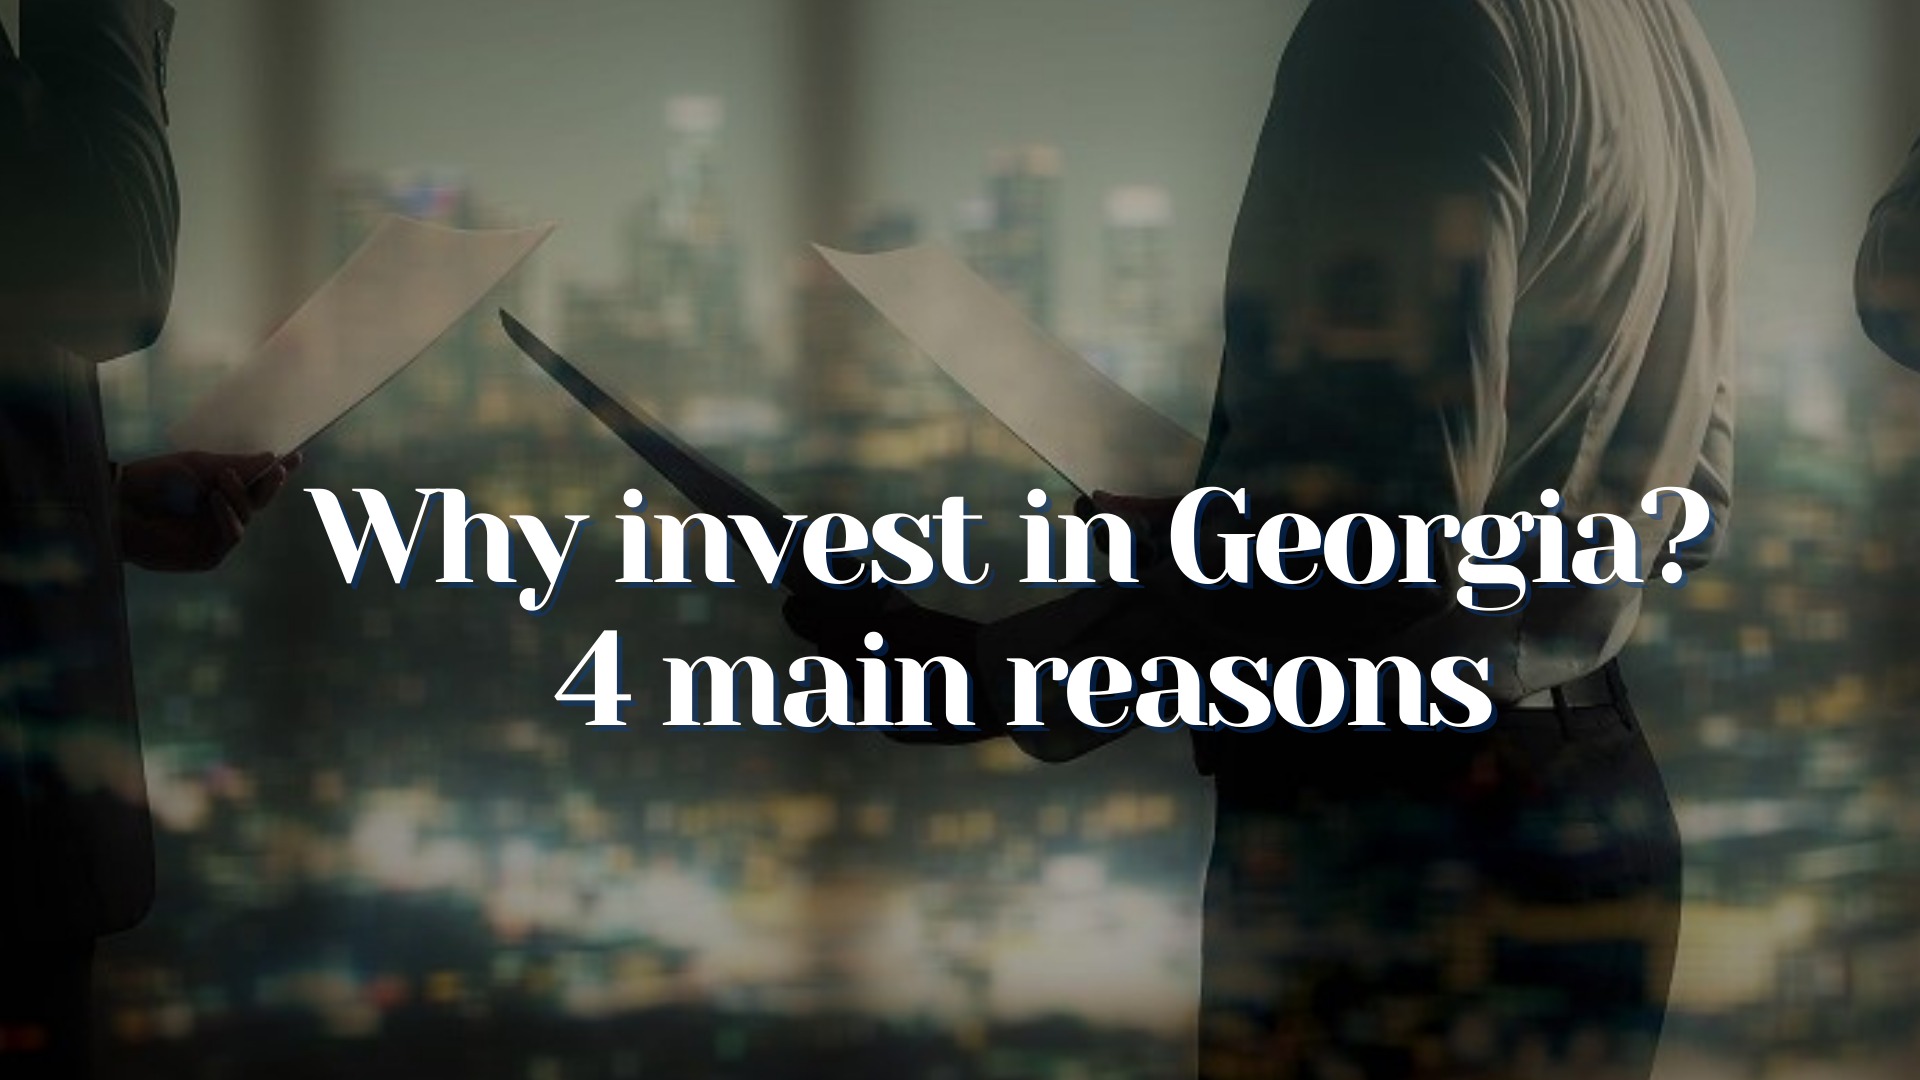 Why invest in Georgia? – 4 main reasons